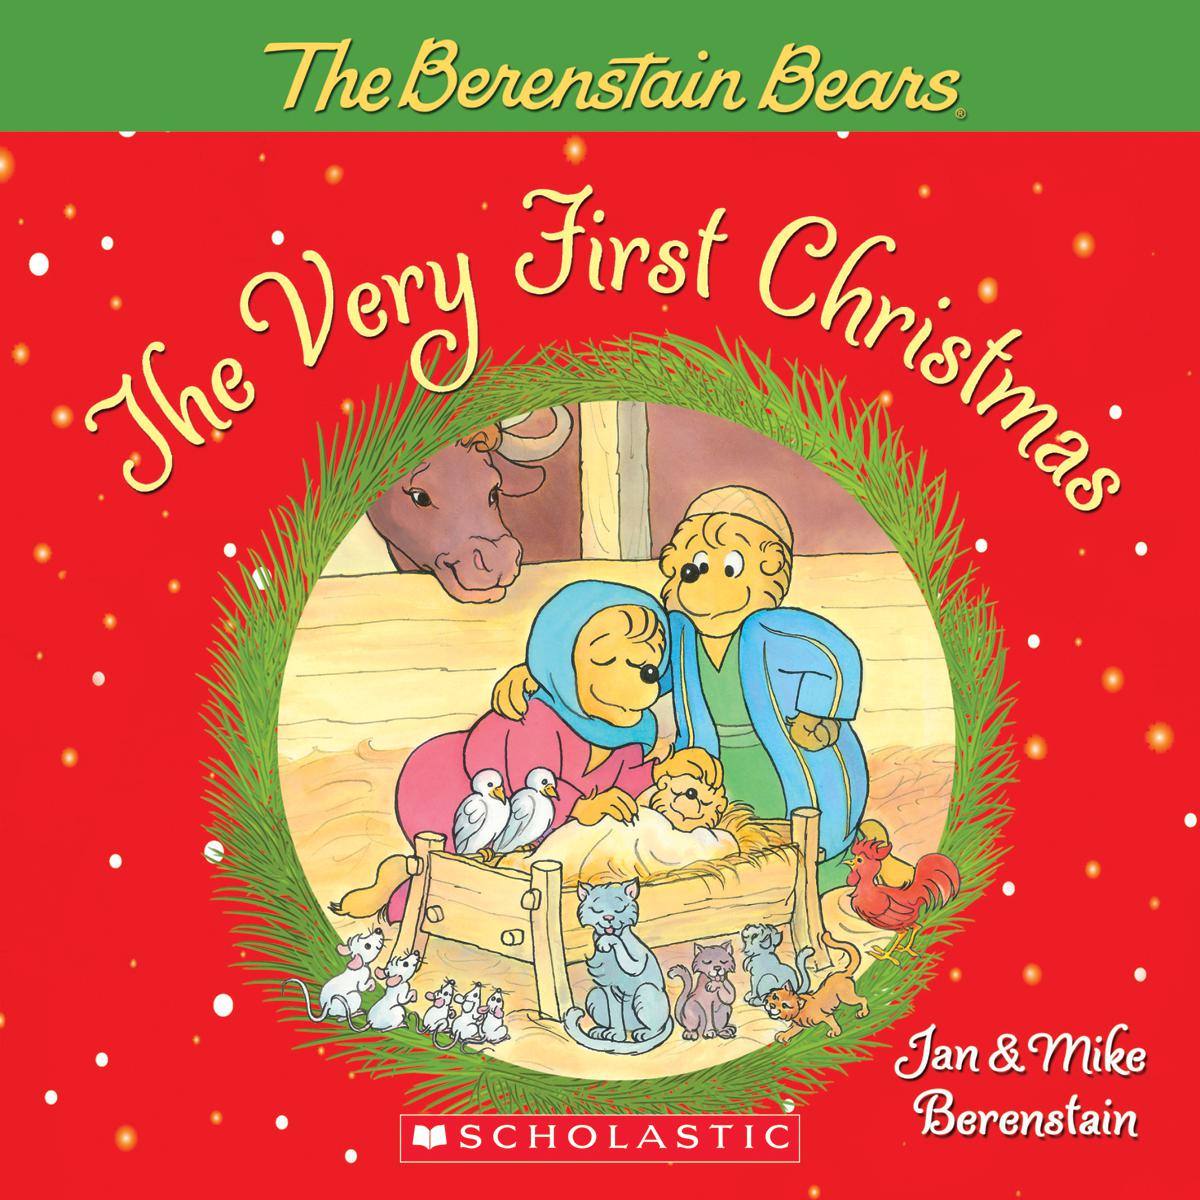  The Berenstain Bears®: The Very First Christmas 